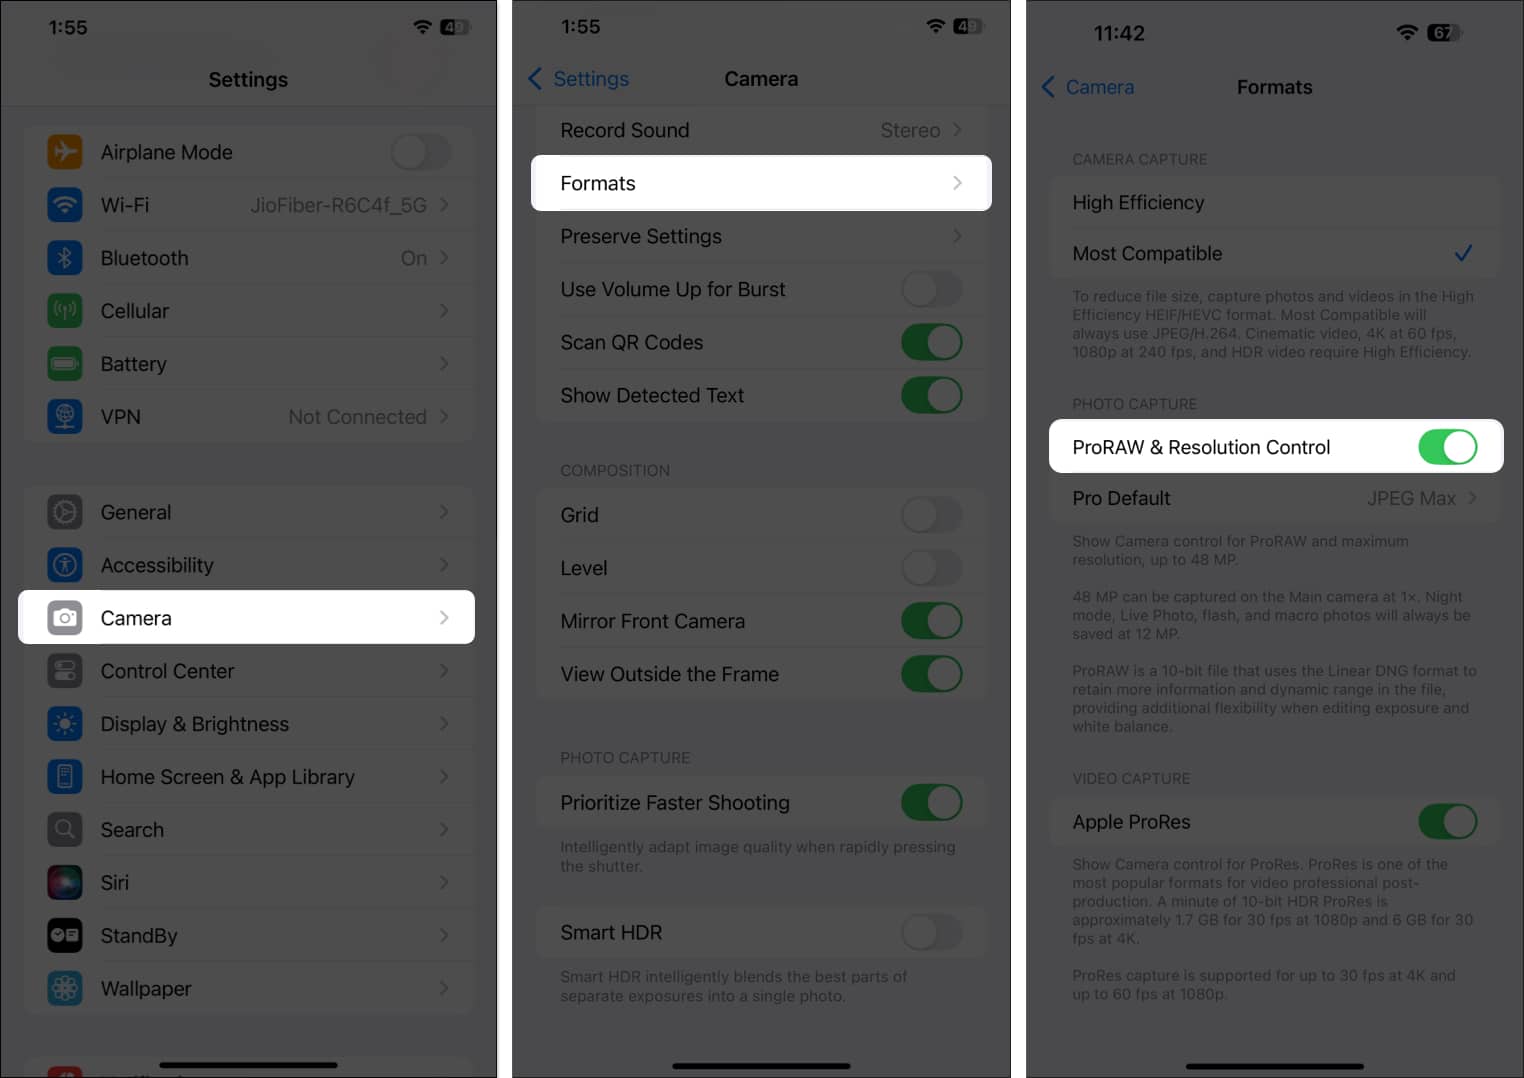 ProRAW and Resolution Control option in iPhone Settings app.